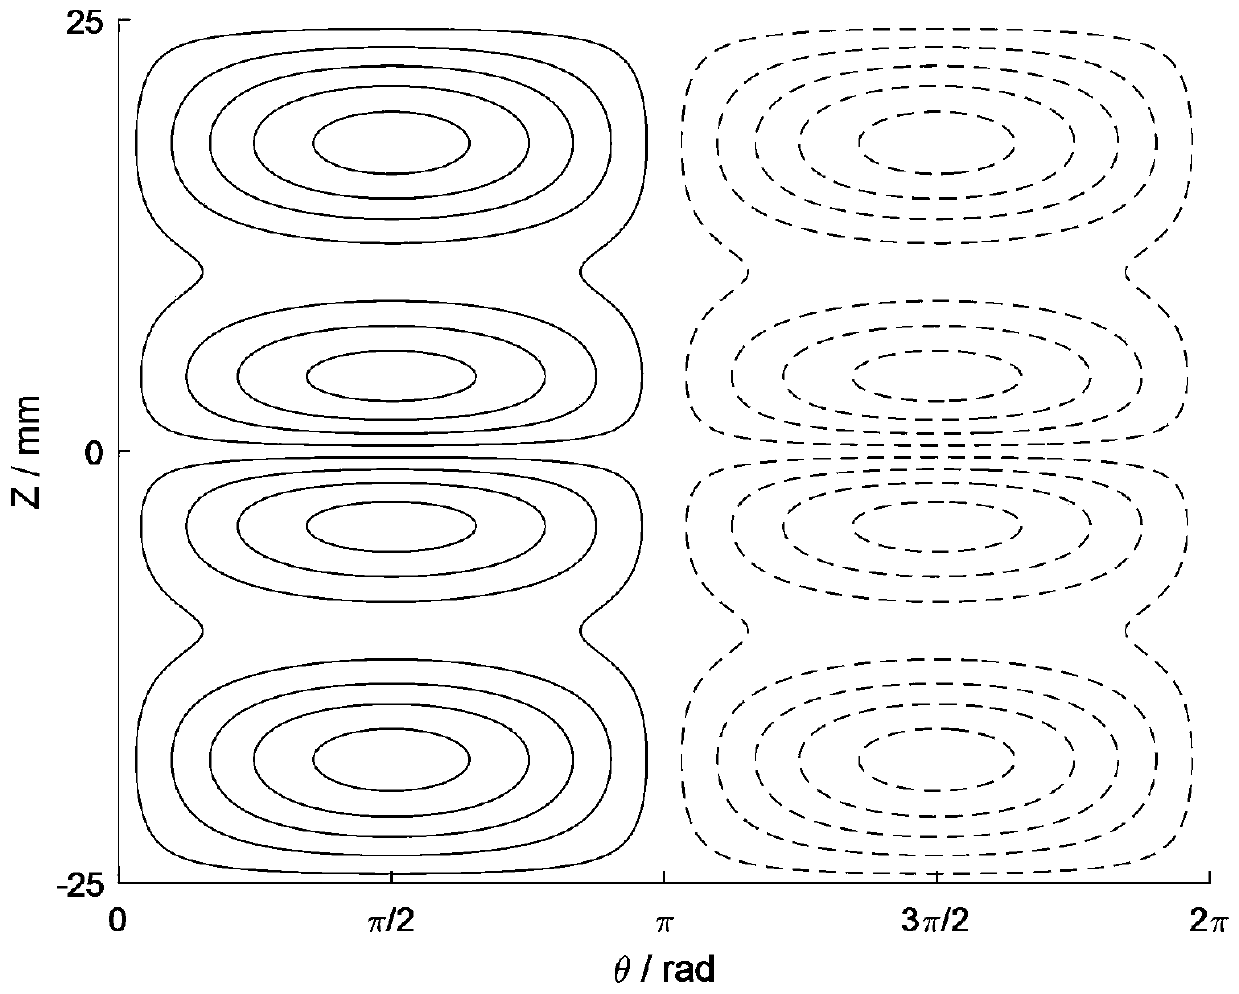 A design method of a cylindrical radial uniform magnetic field coil